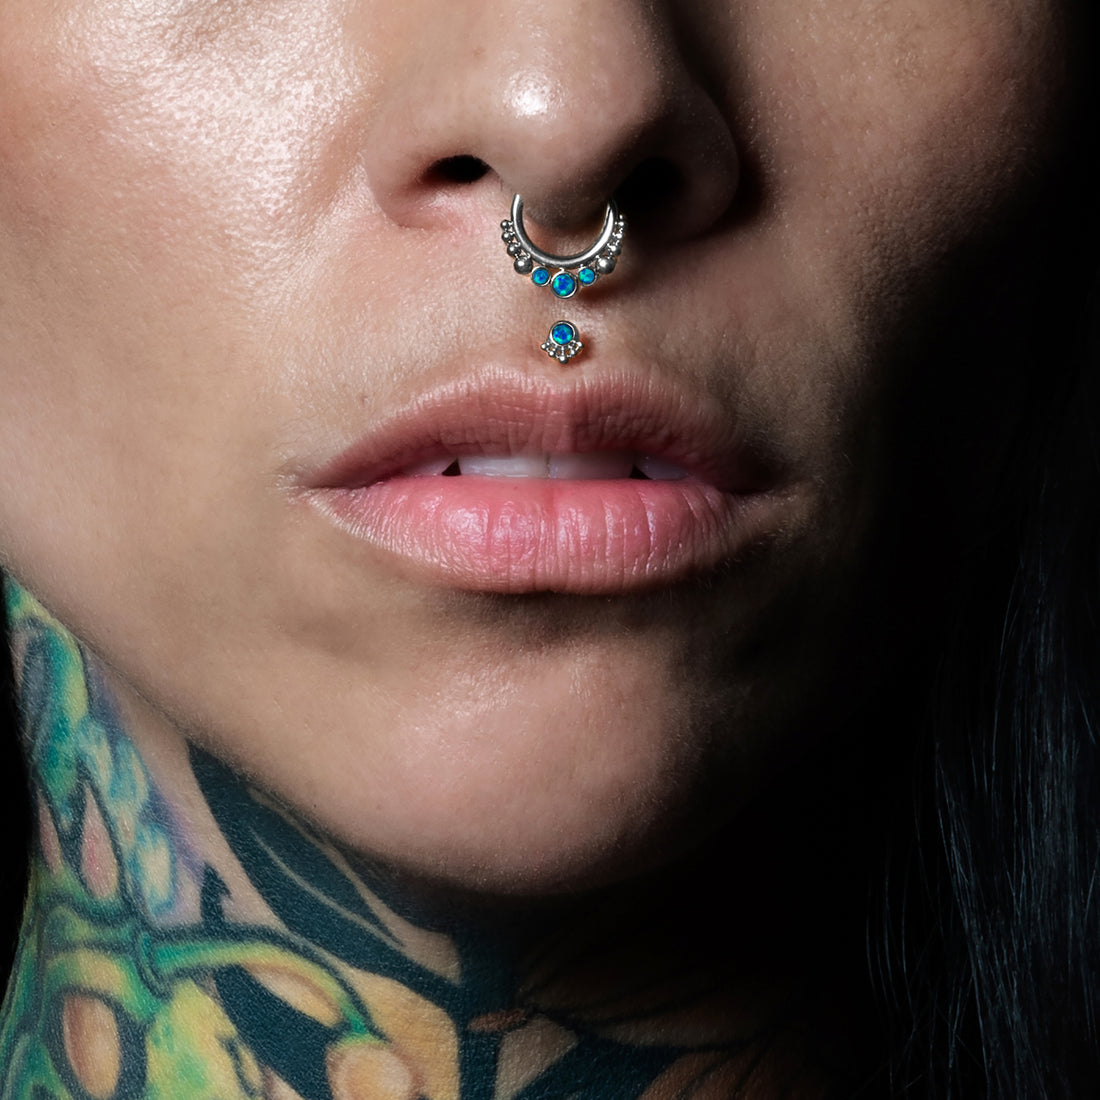 model wearing Layla medusa Labret with Blue Opal and siti septum clicker